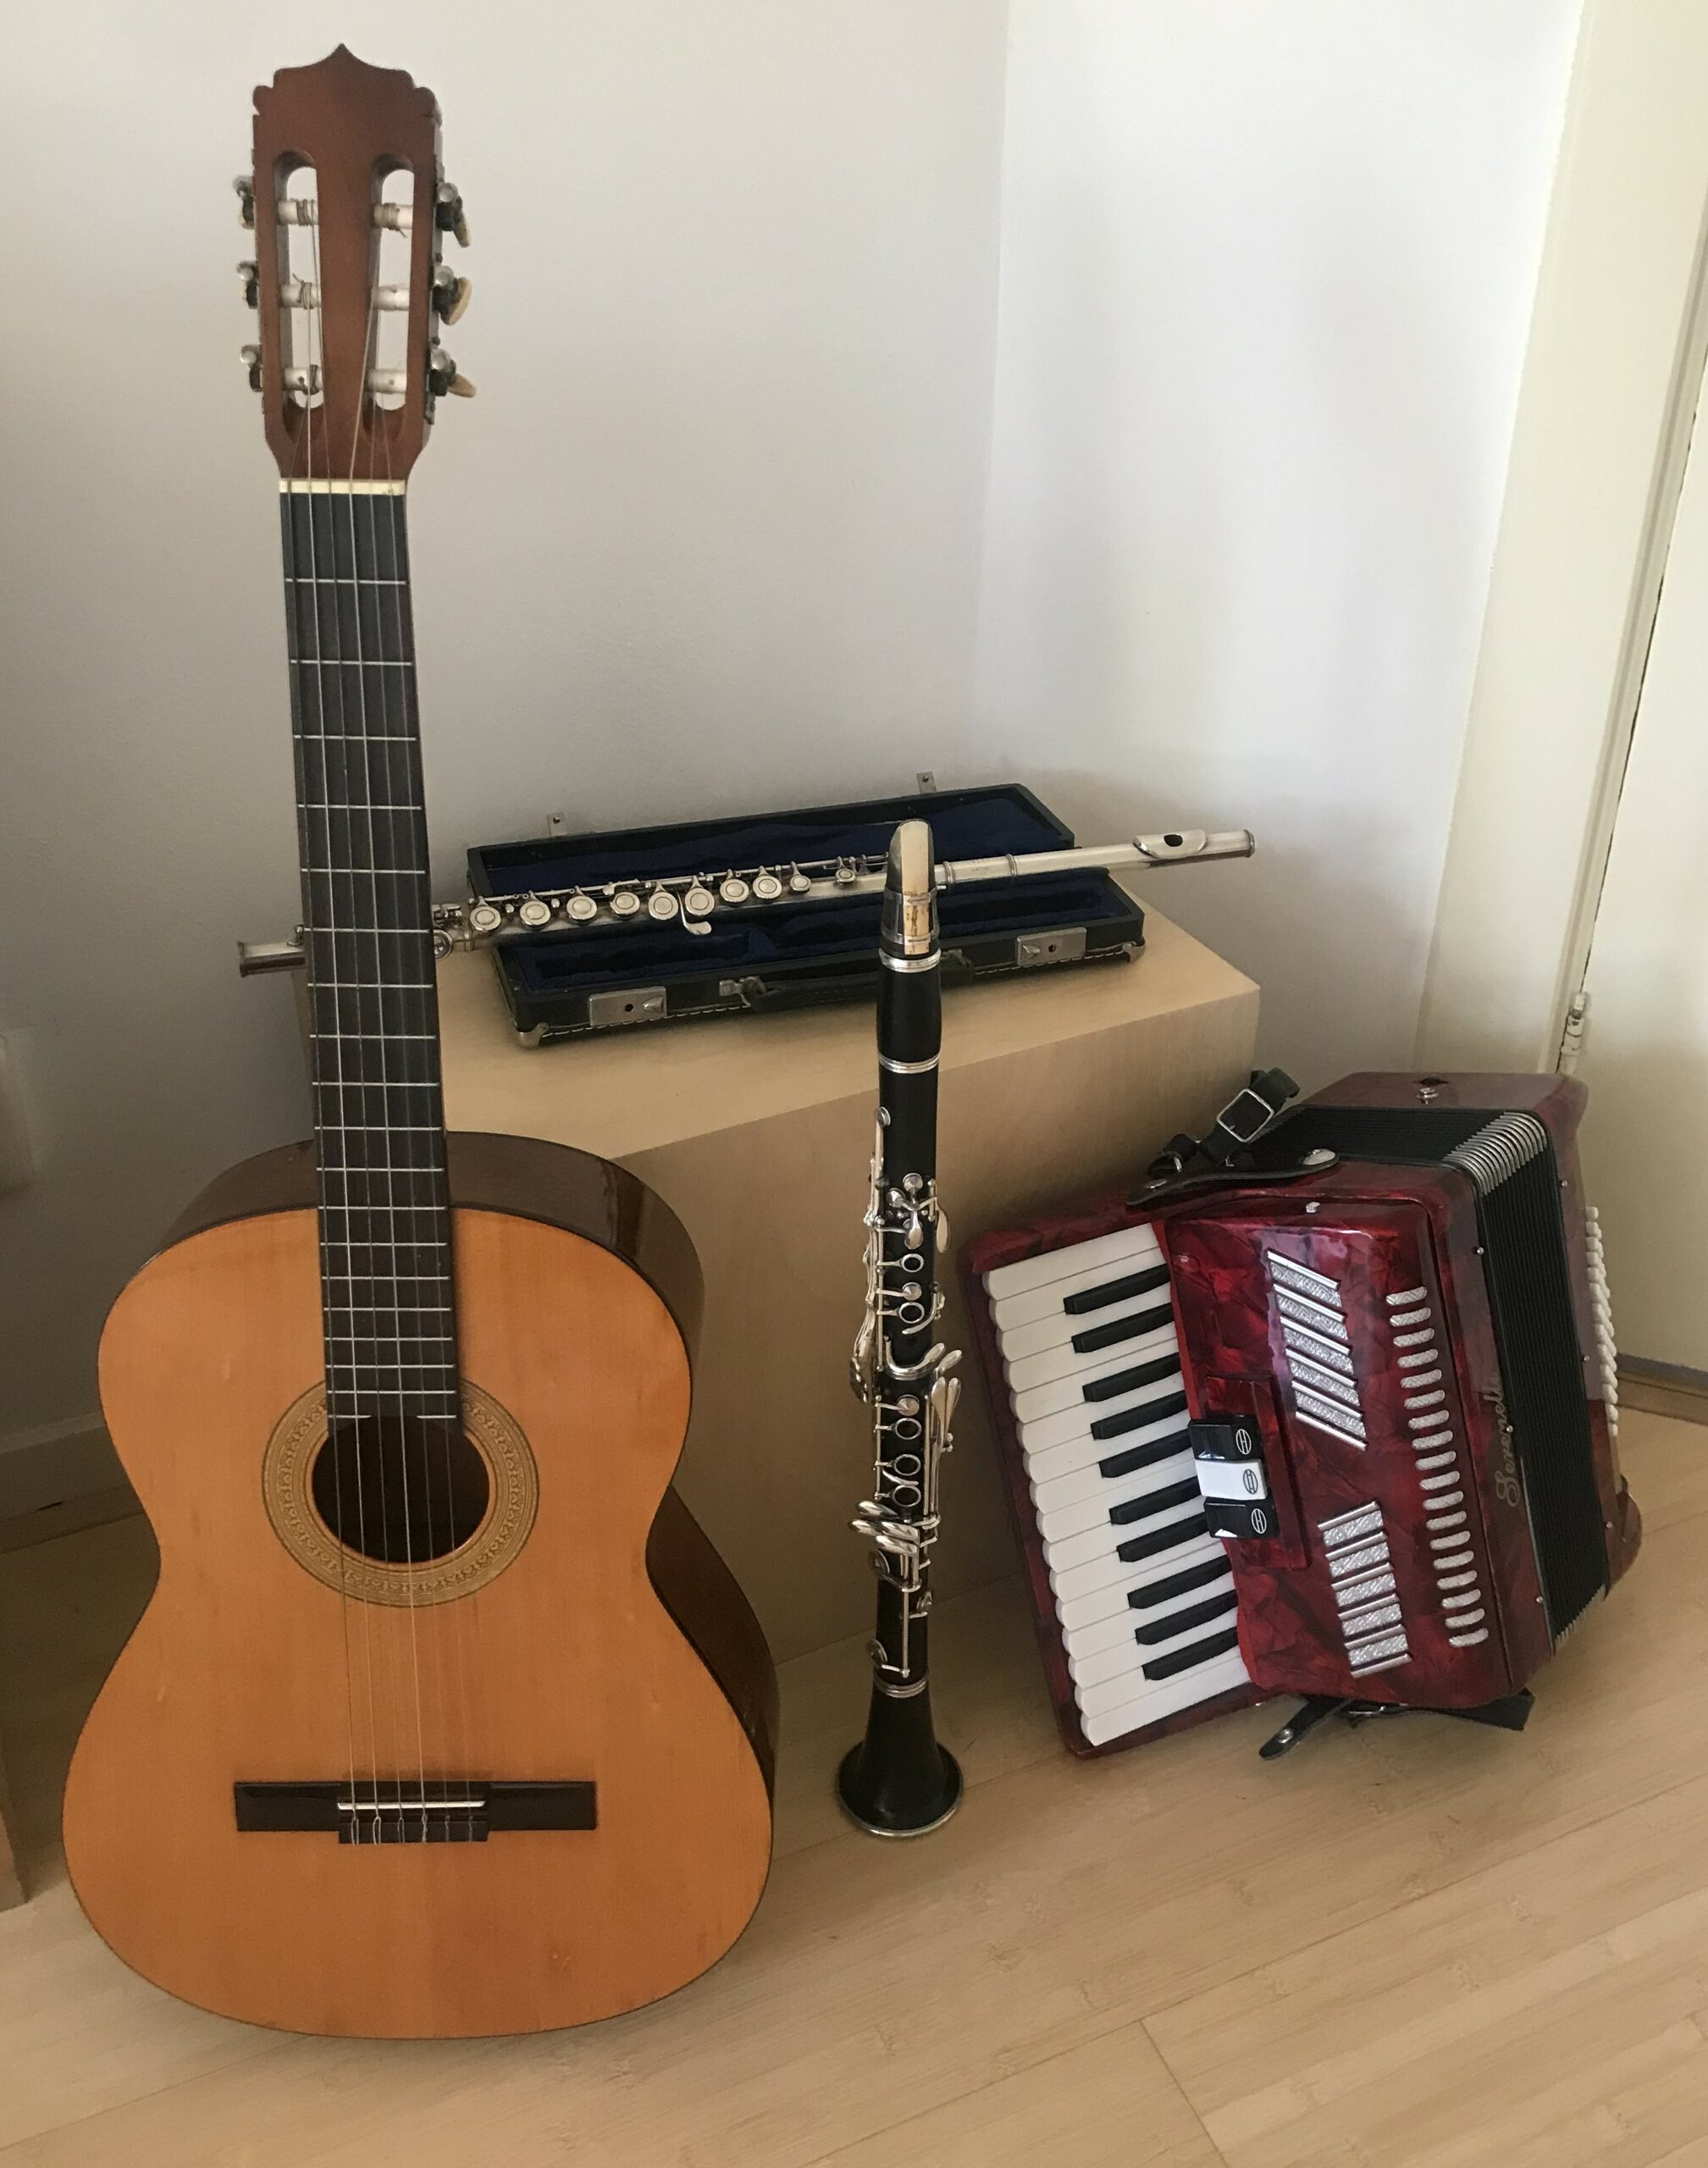 Used but usable instruments